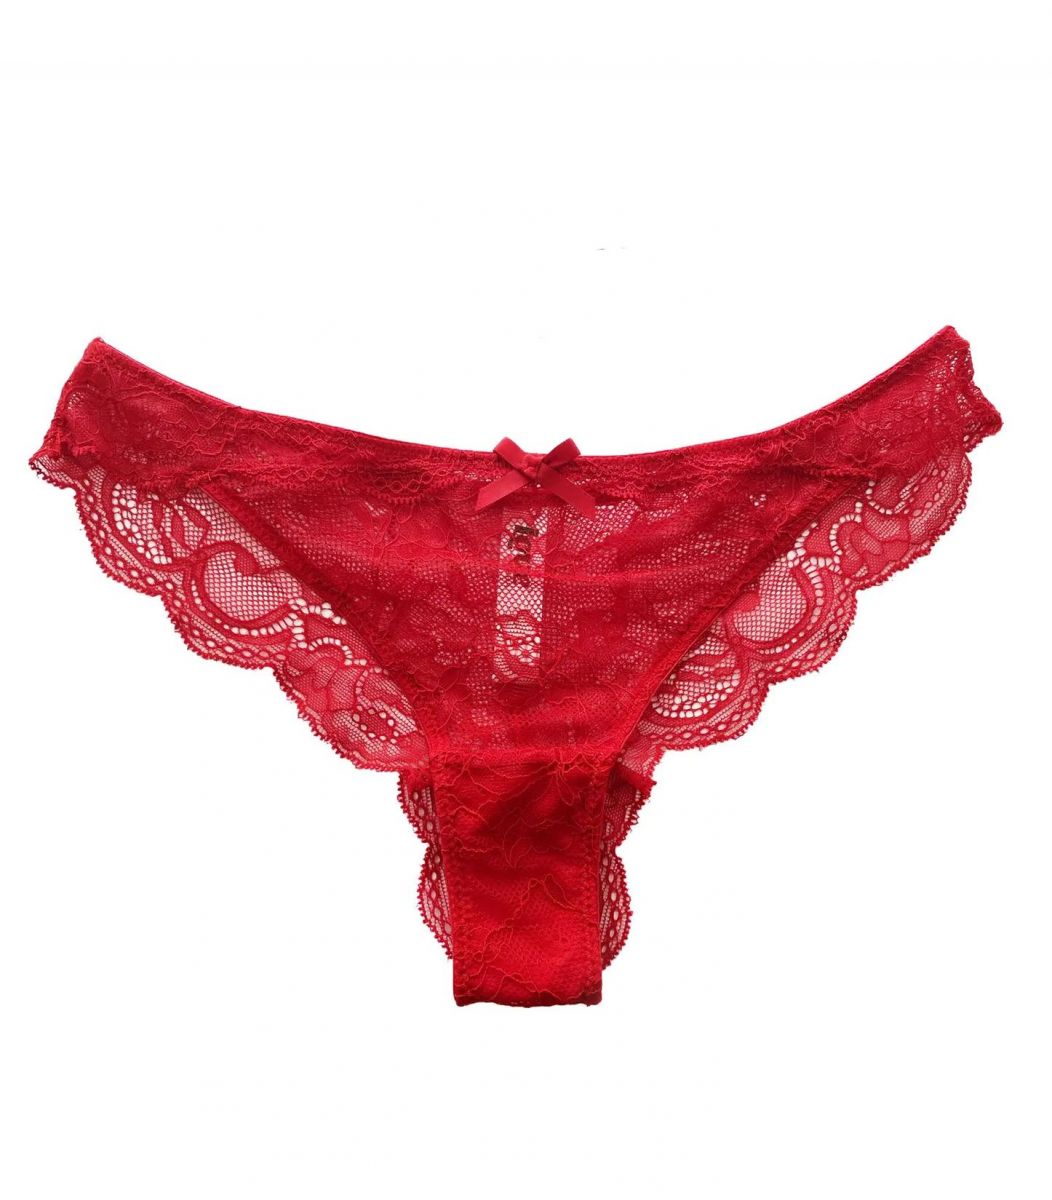  Panty Love and Bra Love and Bra Women panty lace String LO31823-1